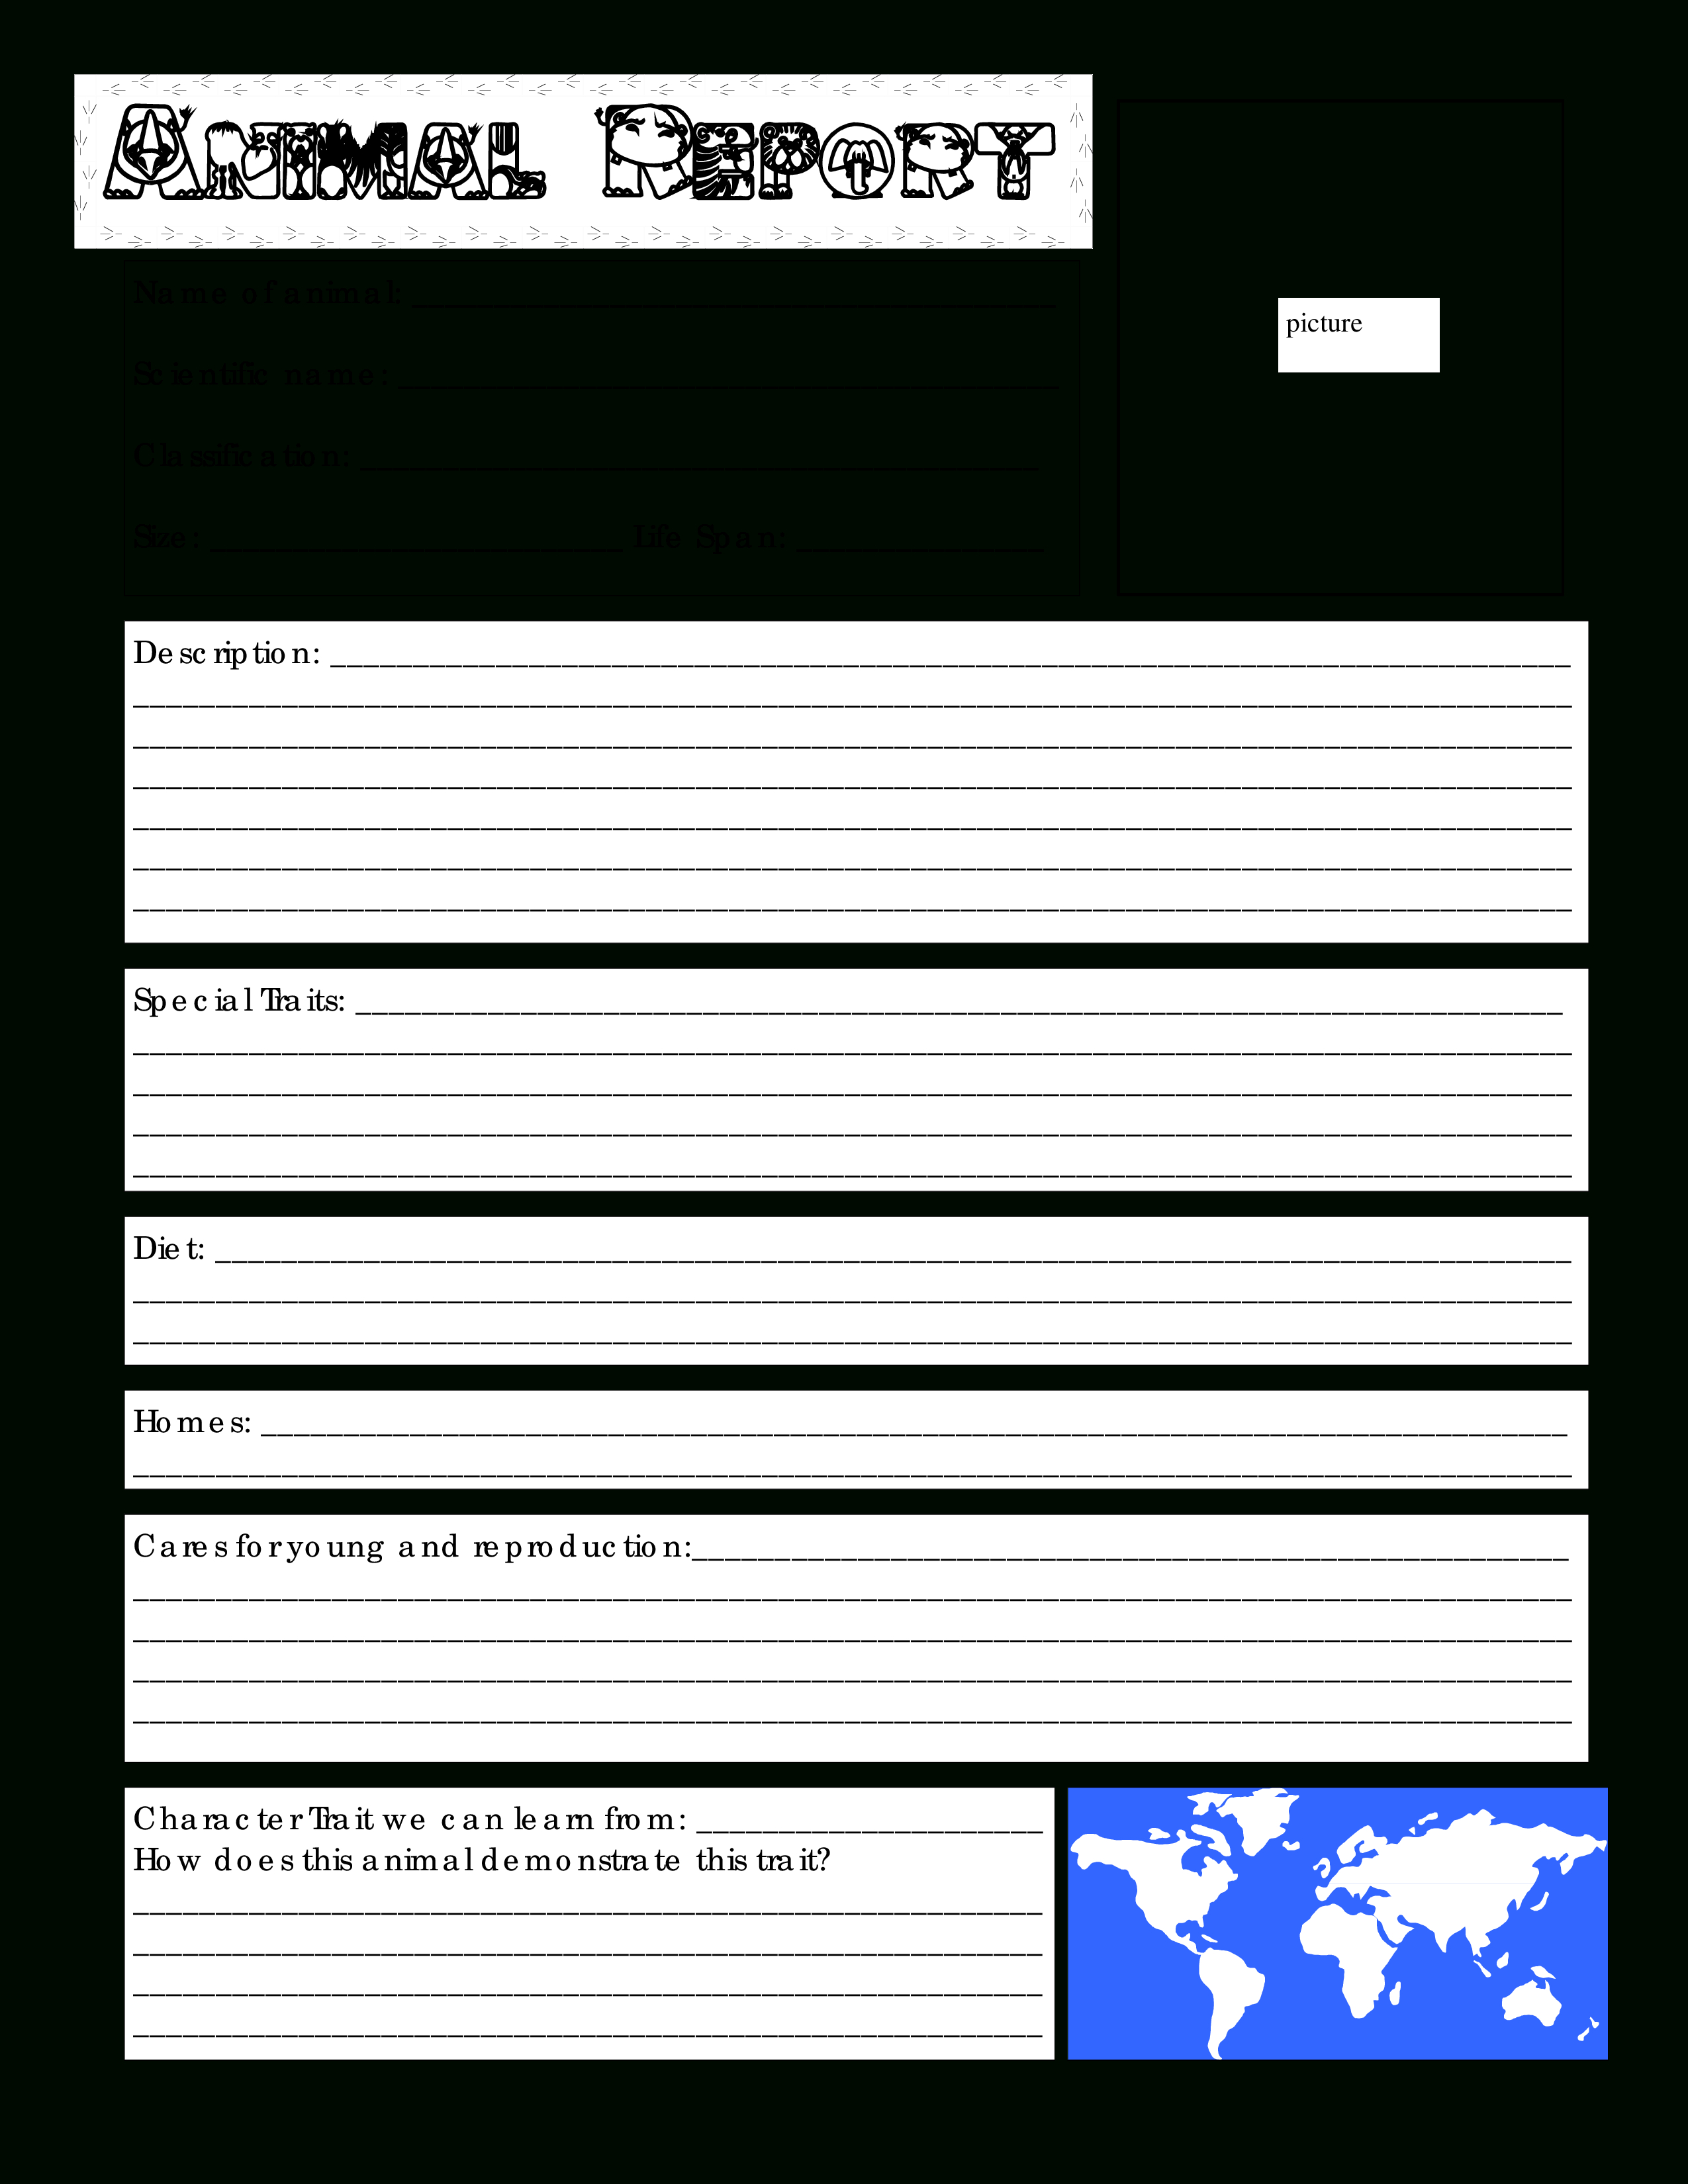 Blank Animal Report | Templates At Allbusinesstemplates Throughout Animal Report Template